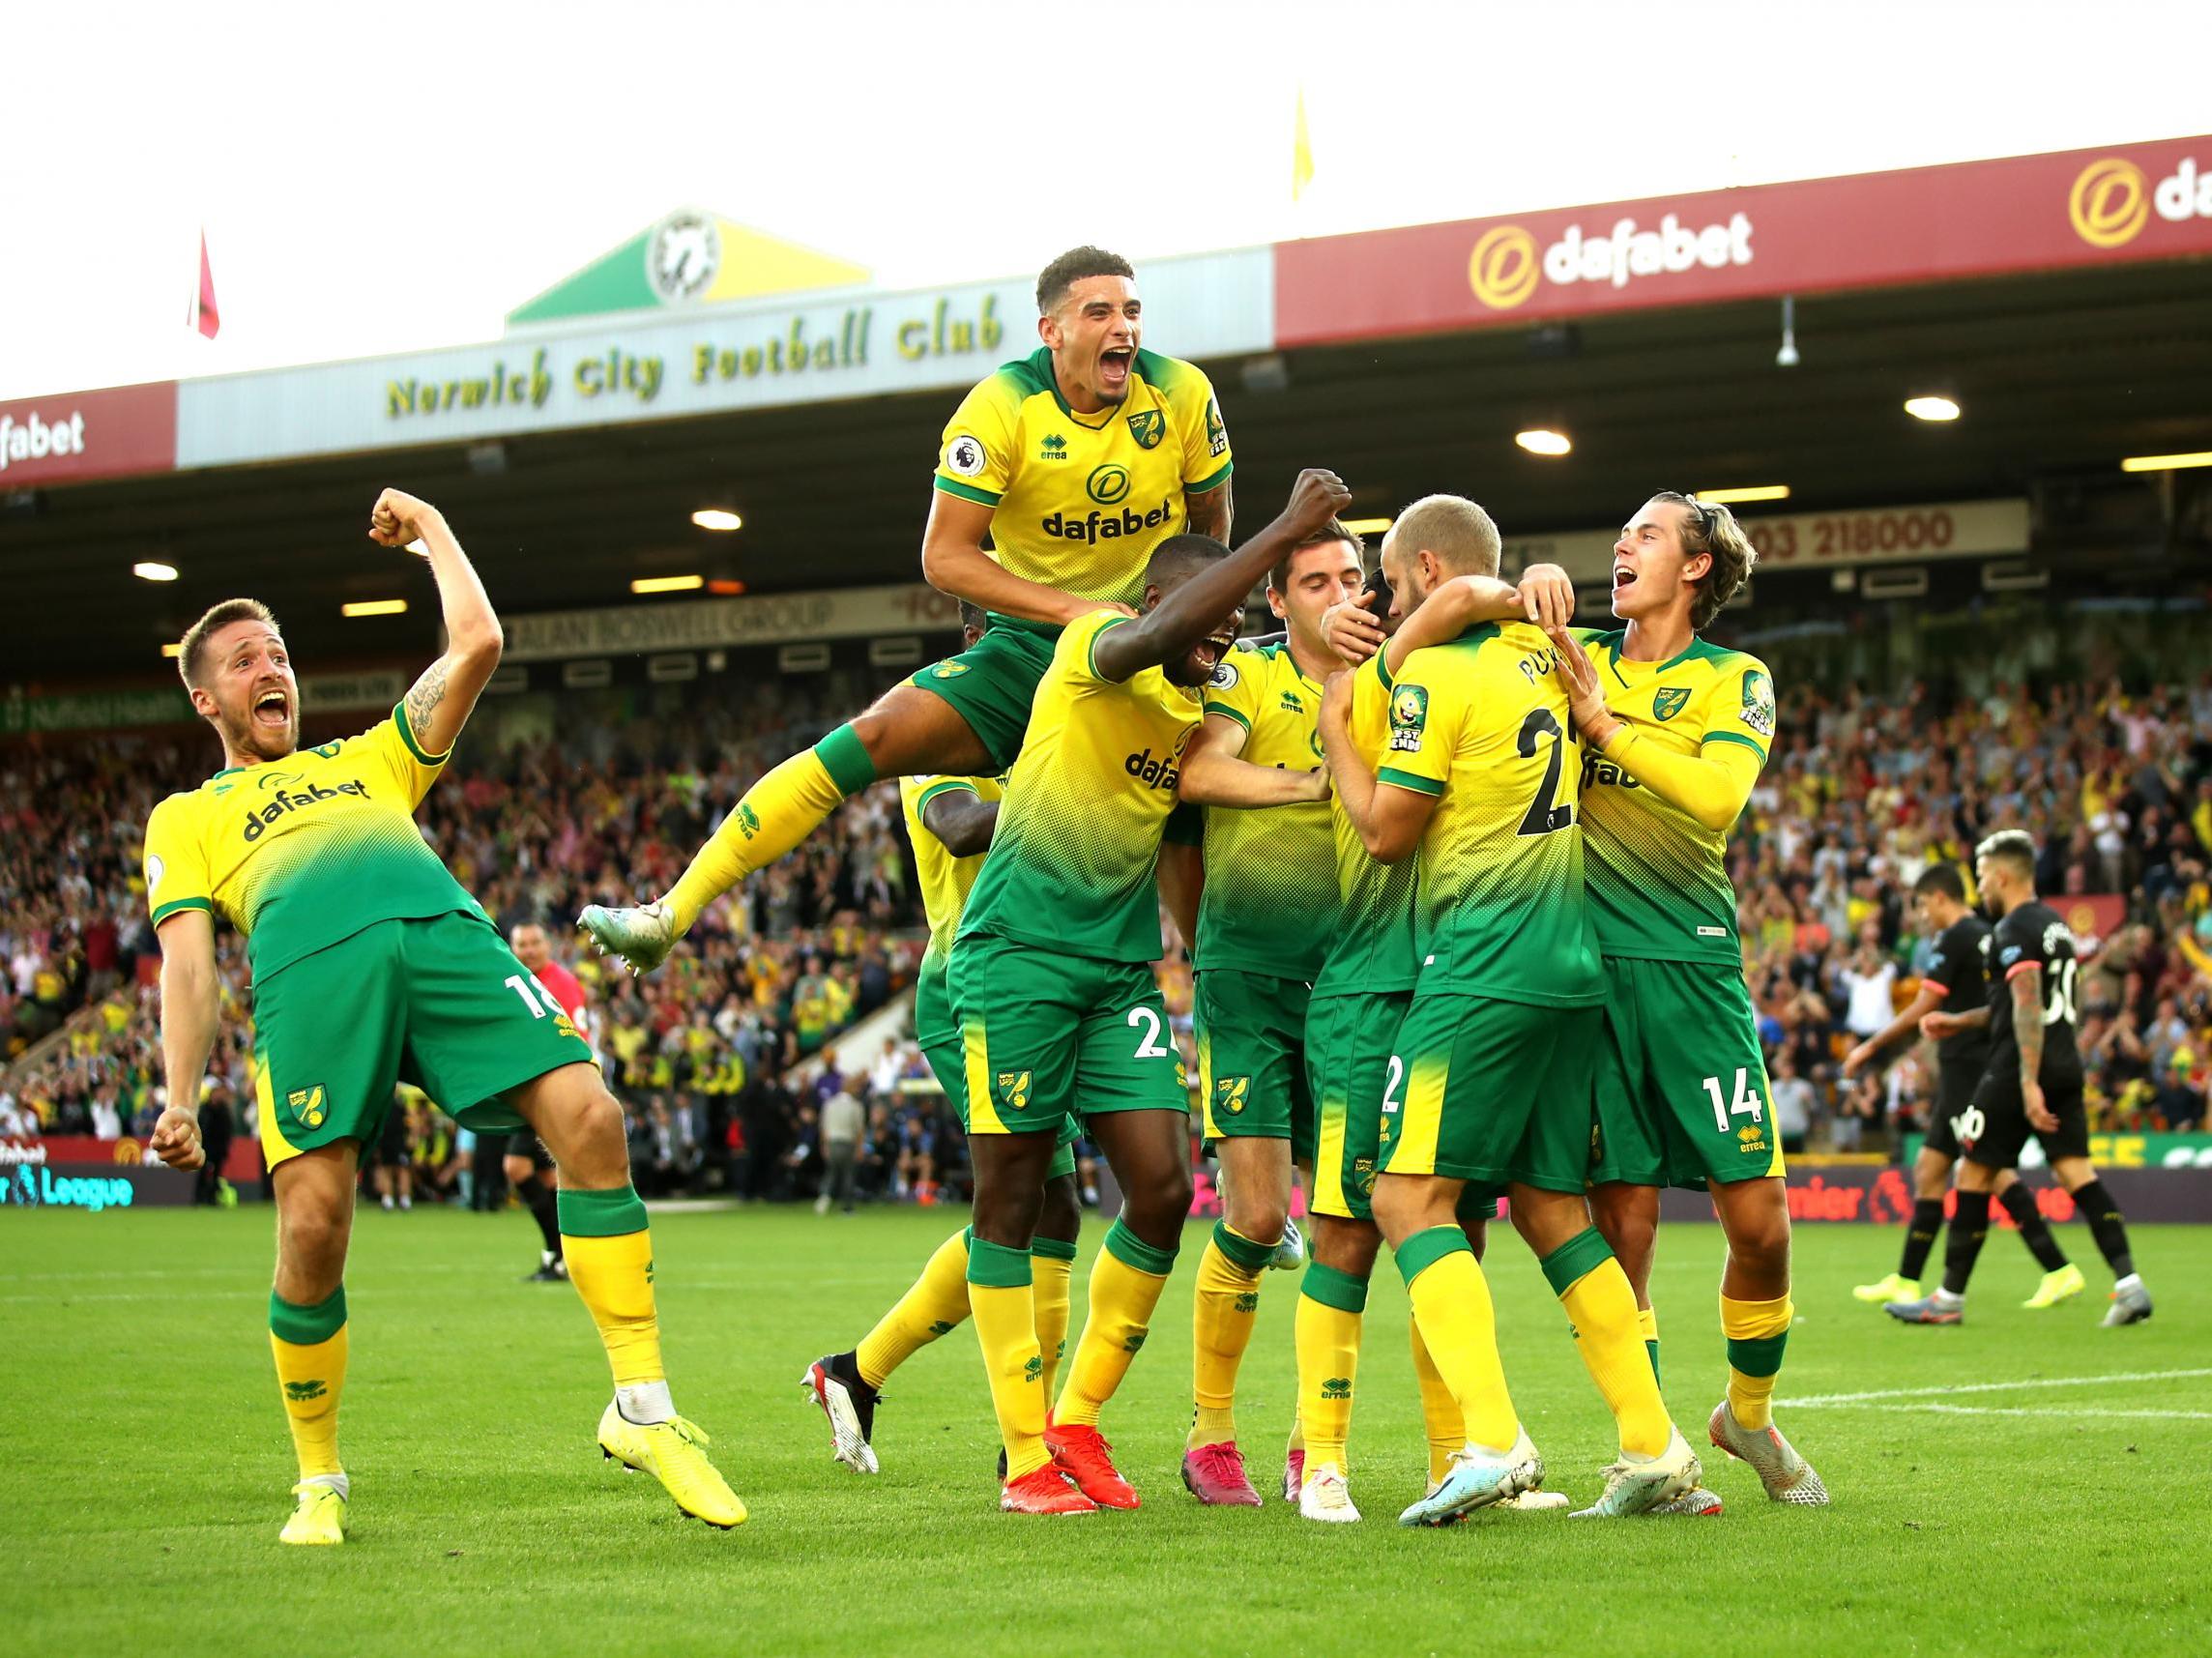 Norwich's players celebrate a goal against Manchester City earlier this season